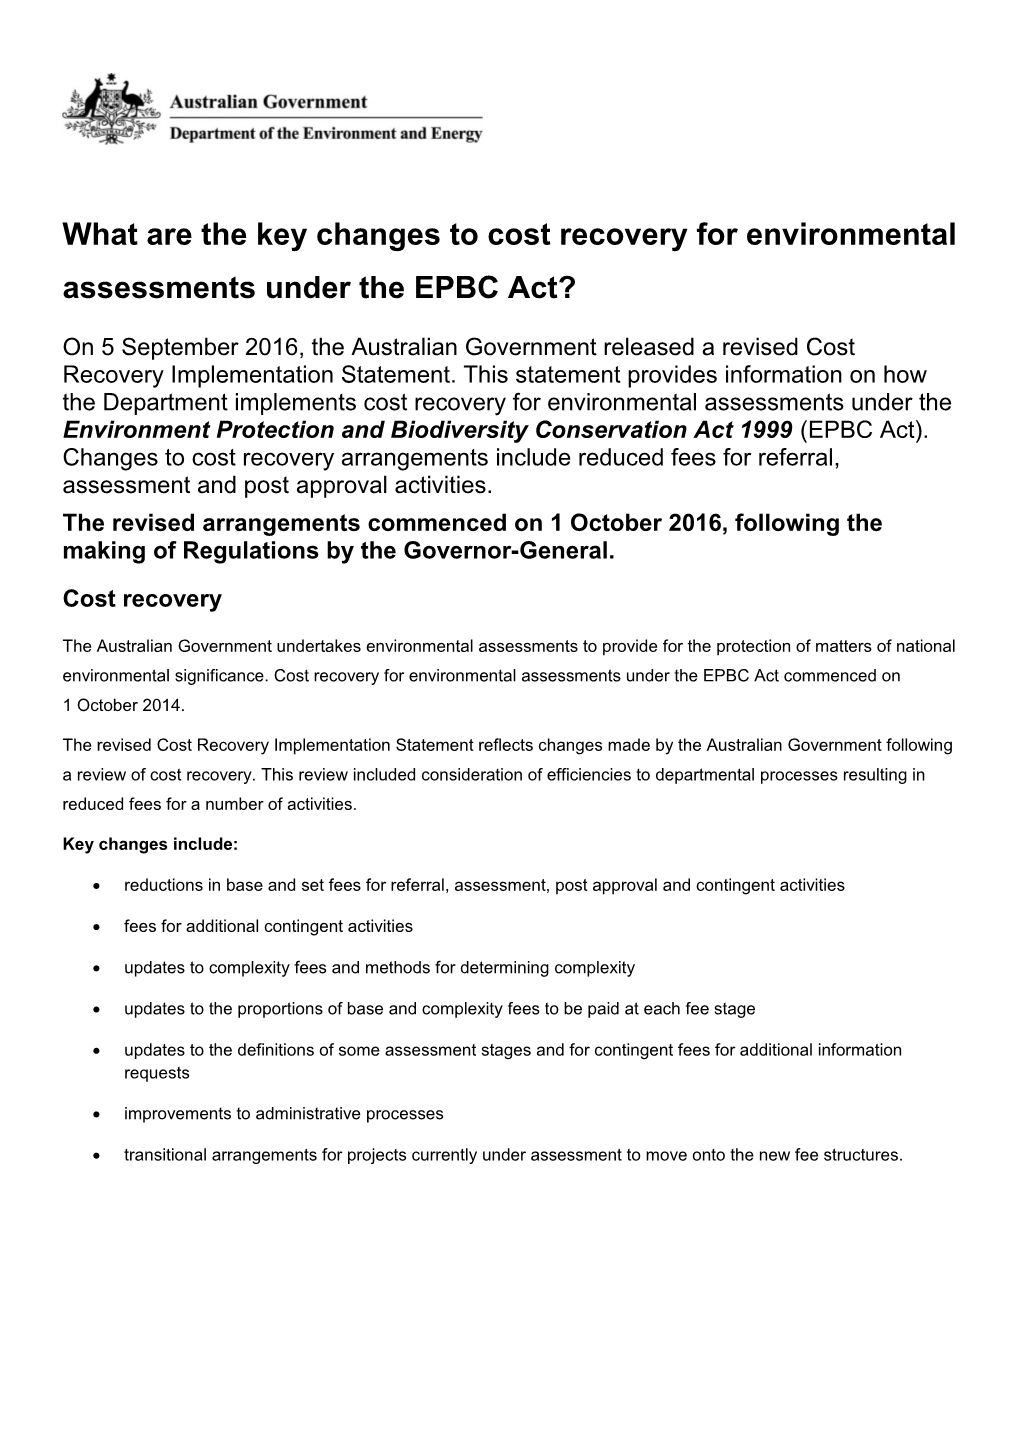 What Are the Key Changes to Cost Recovery for Environmental Assessments Under the EPBC Act?